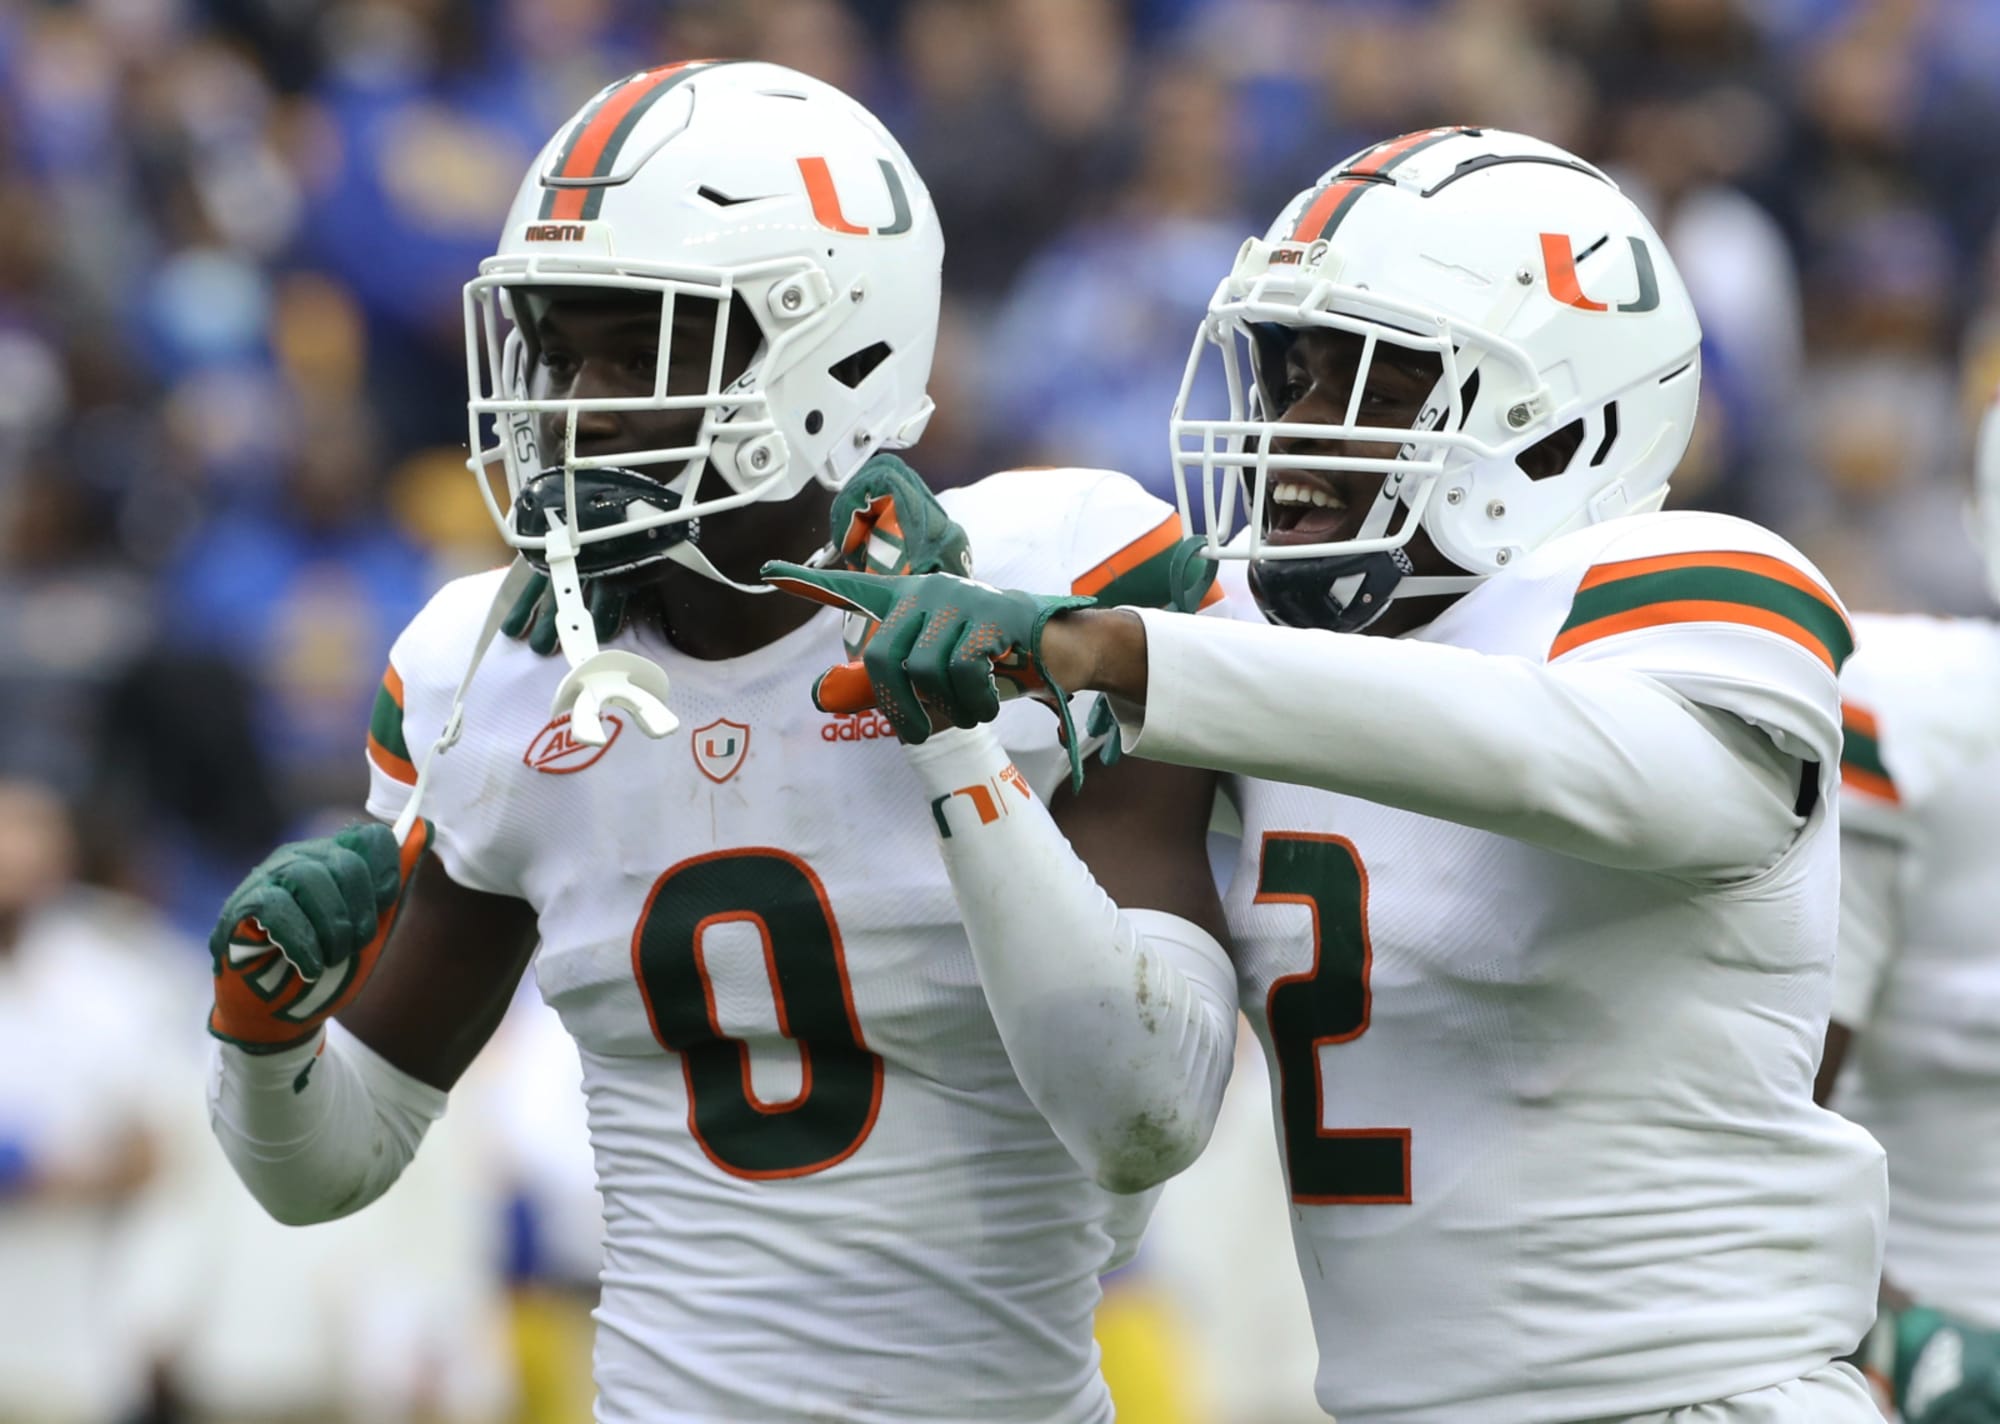 Miami Football Game Saturday Hurricanes Vs Georgia Tech Odds And Prediction For Week 10